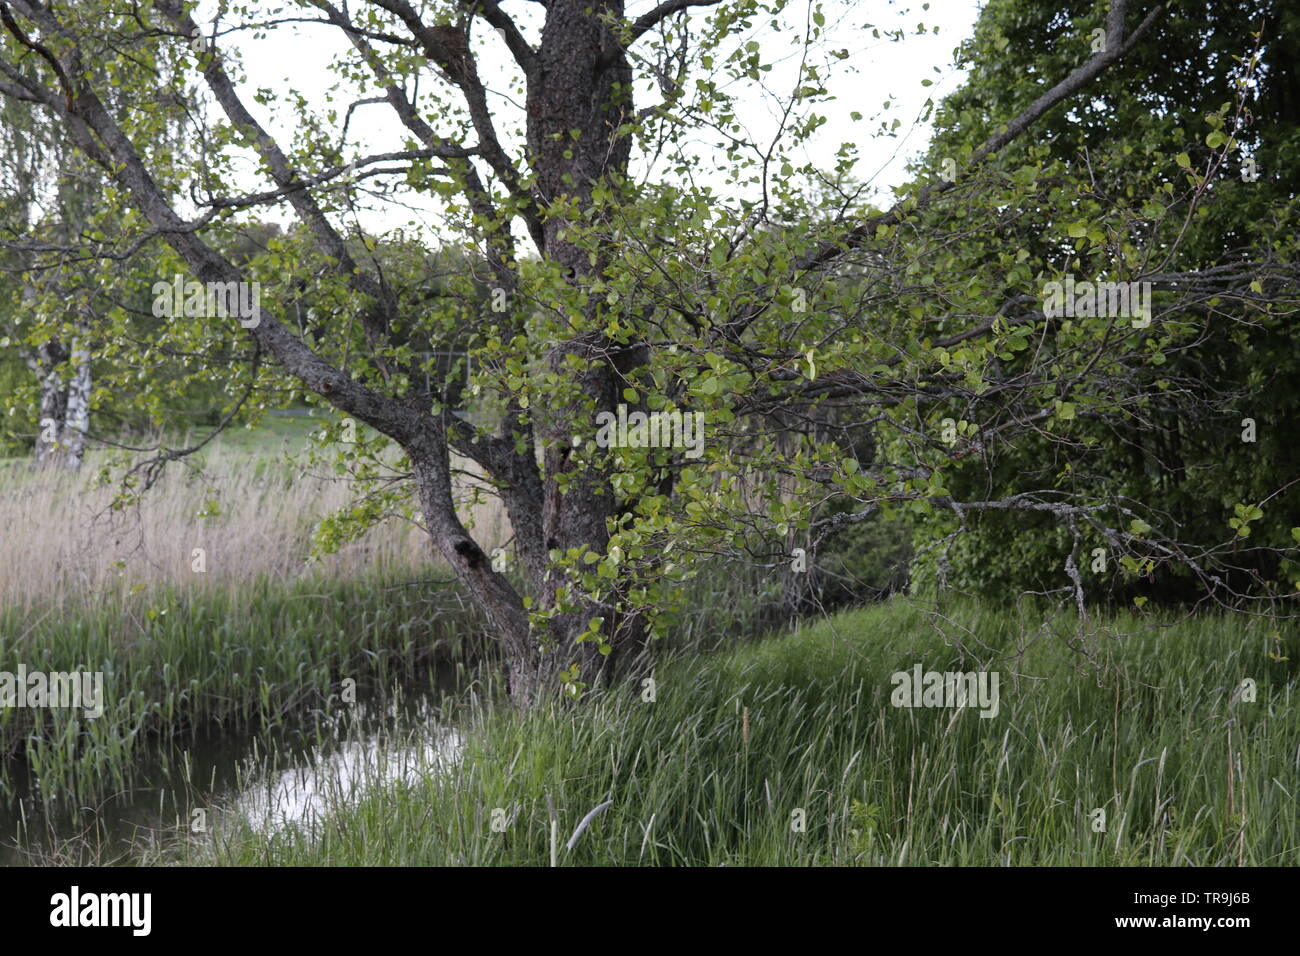 A massive tree with green leaves by a small river. Stock Photo